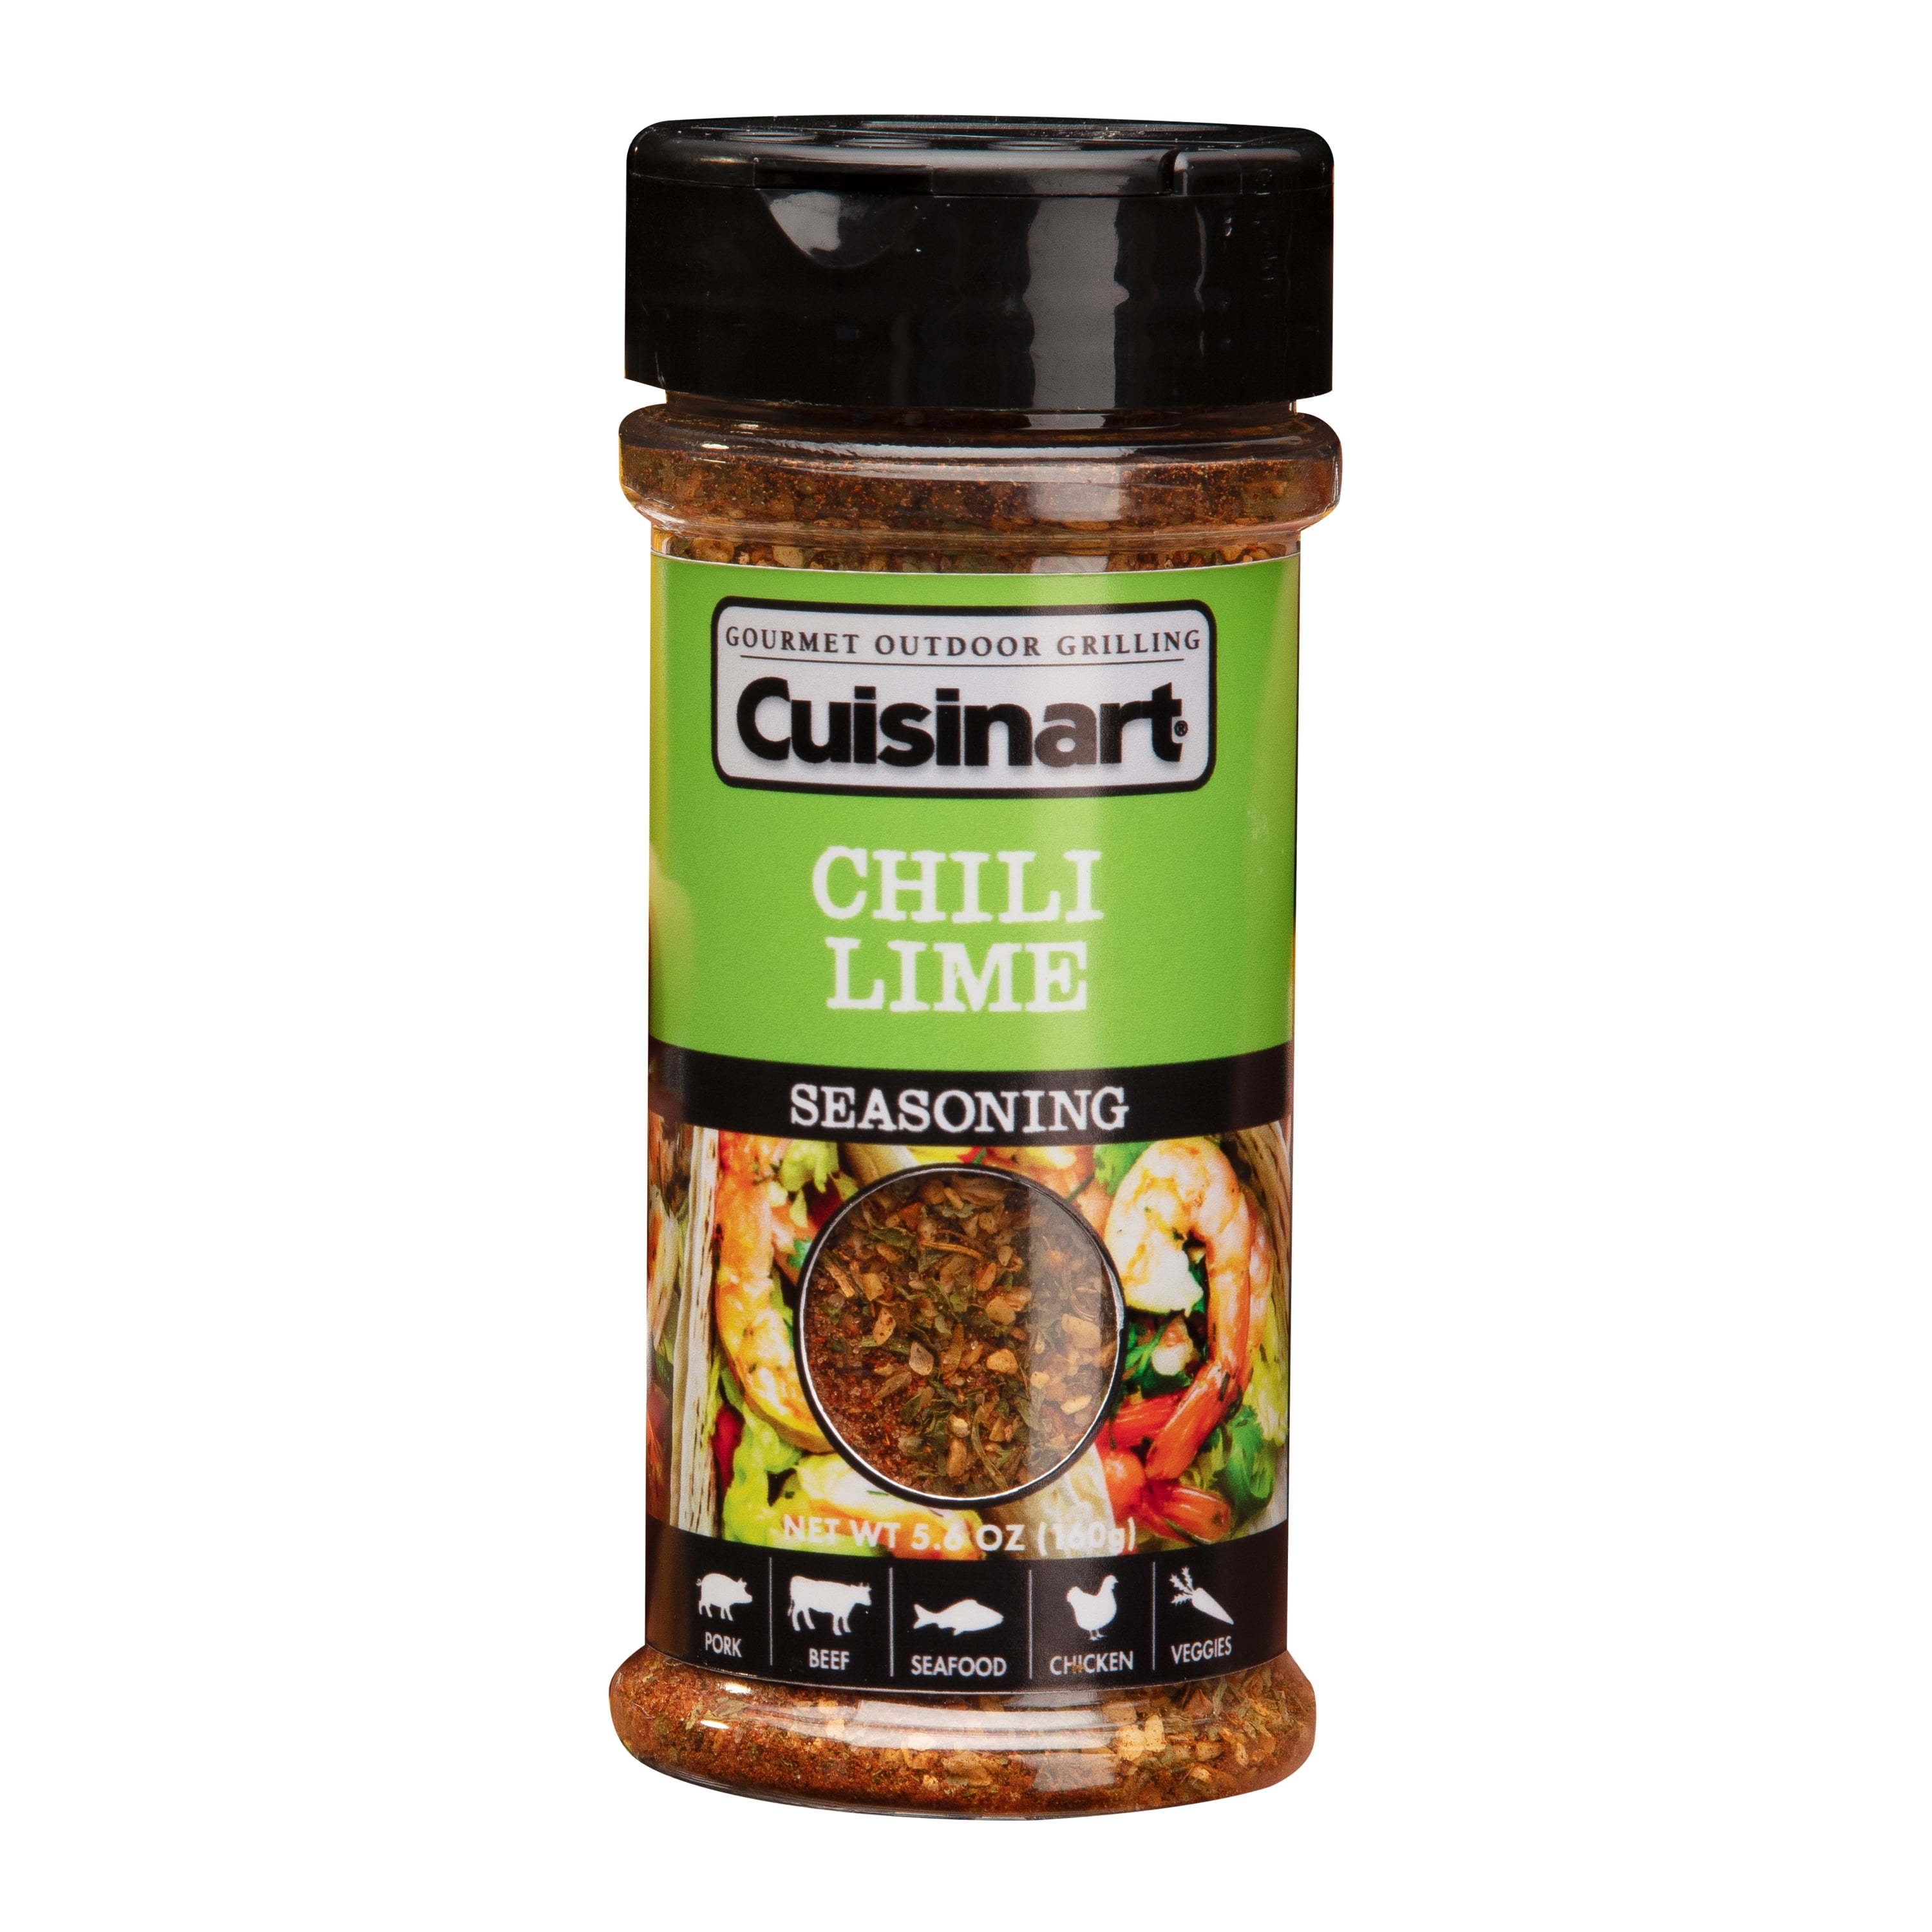 Cuisinart Chili Lime Seasoning - a Flavorful Blend with a Slight Citrus ...